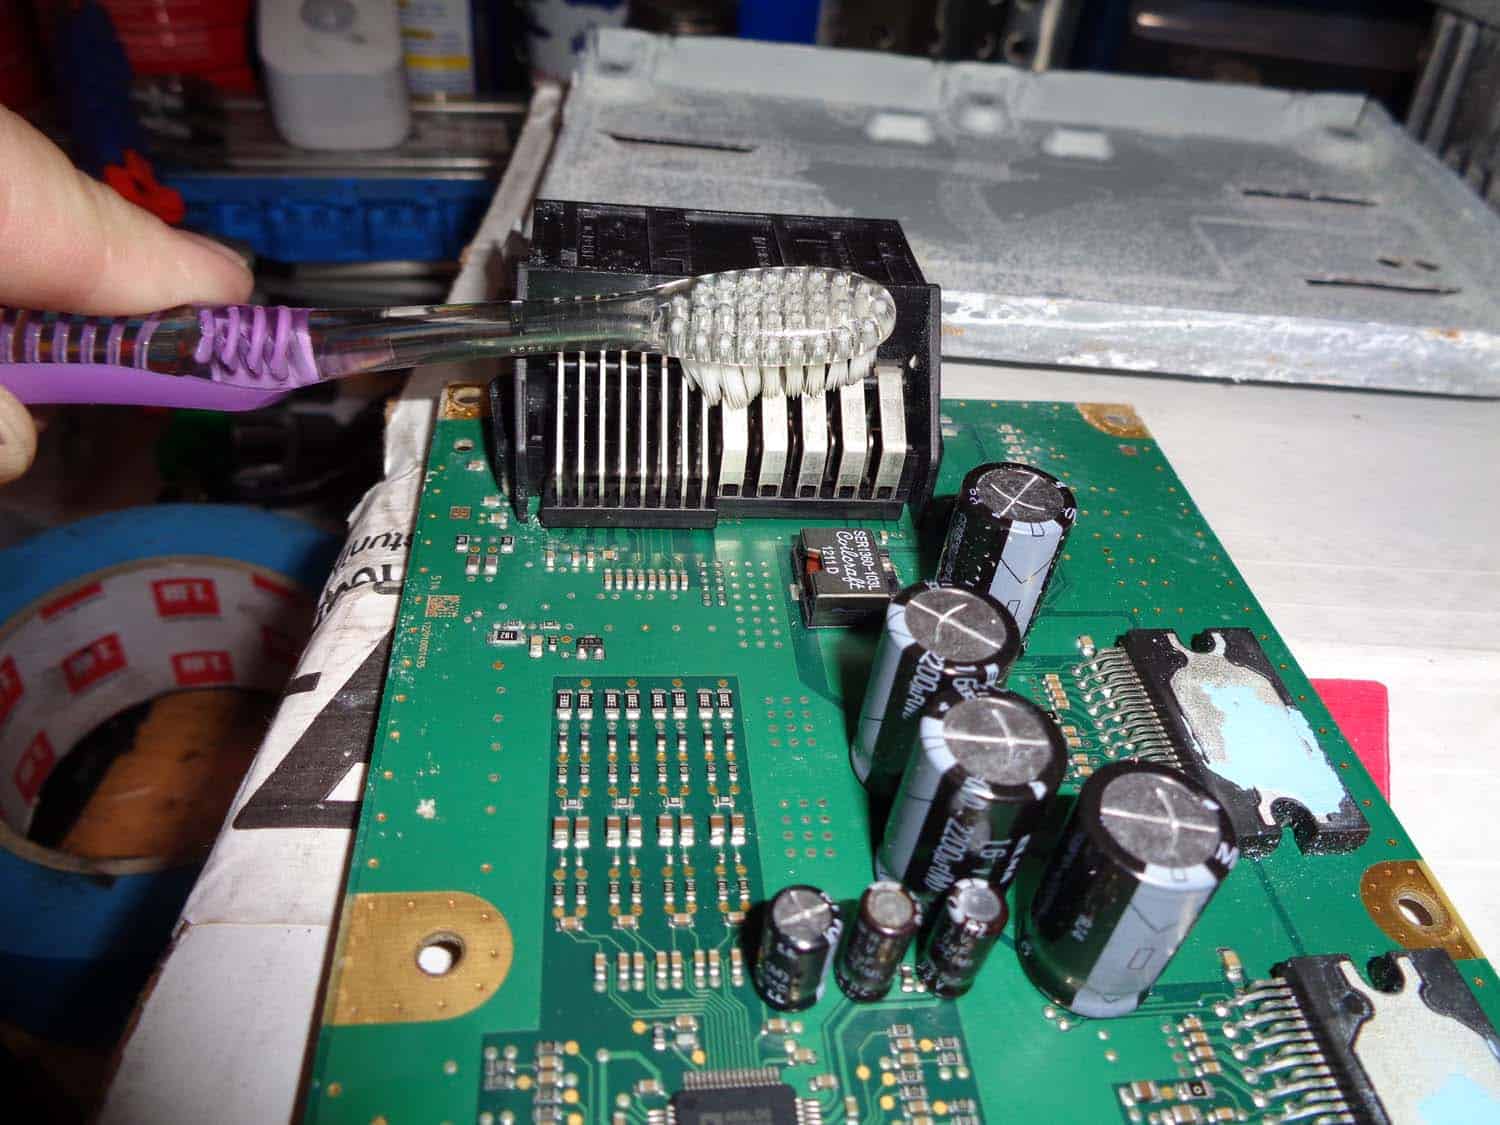 bmw e90 amplifier water damage repair - carefully clean the circuit board with toothbrush